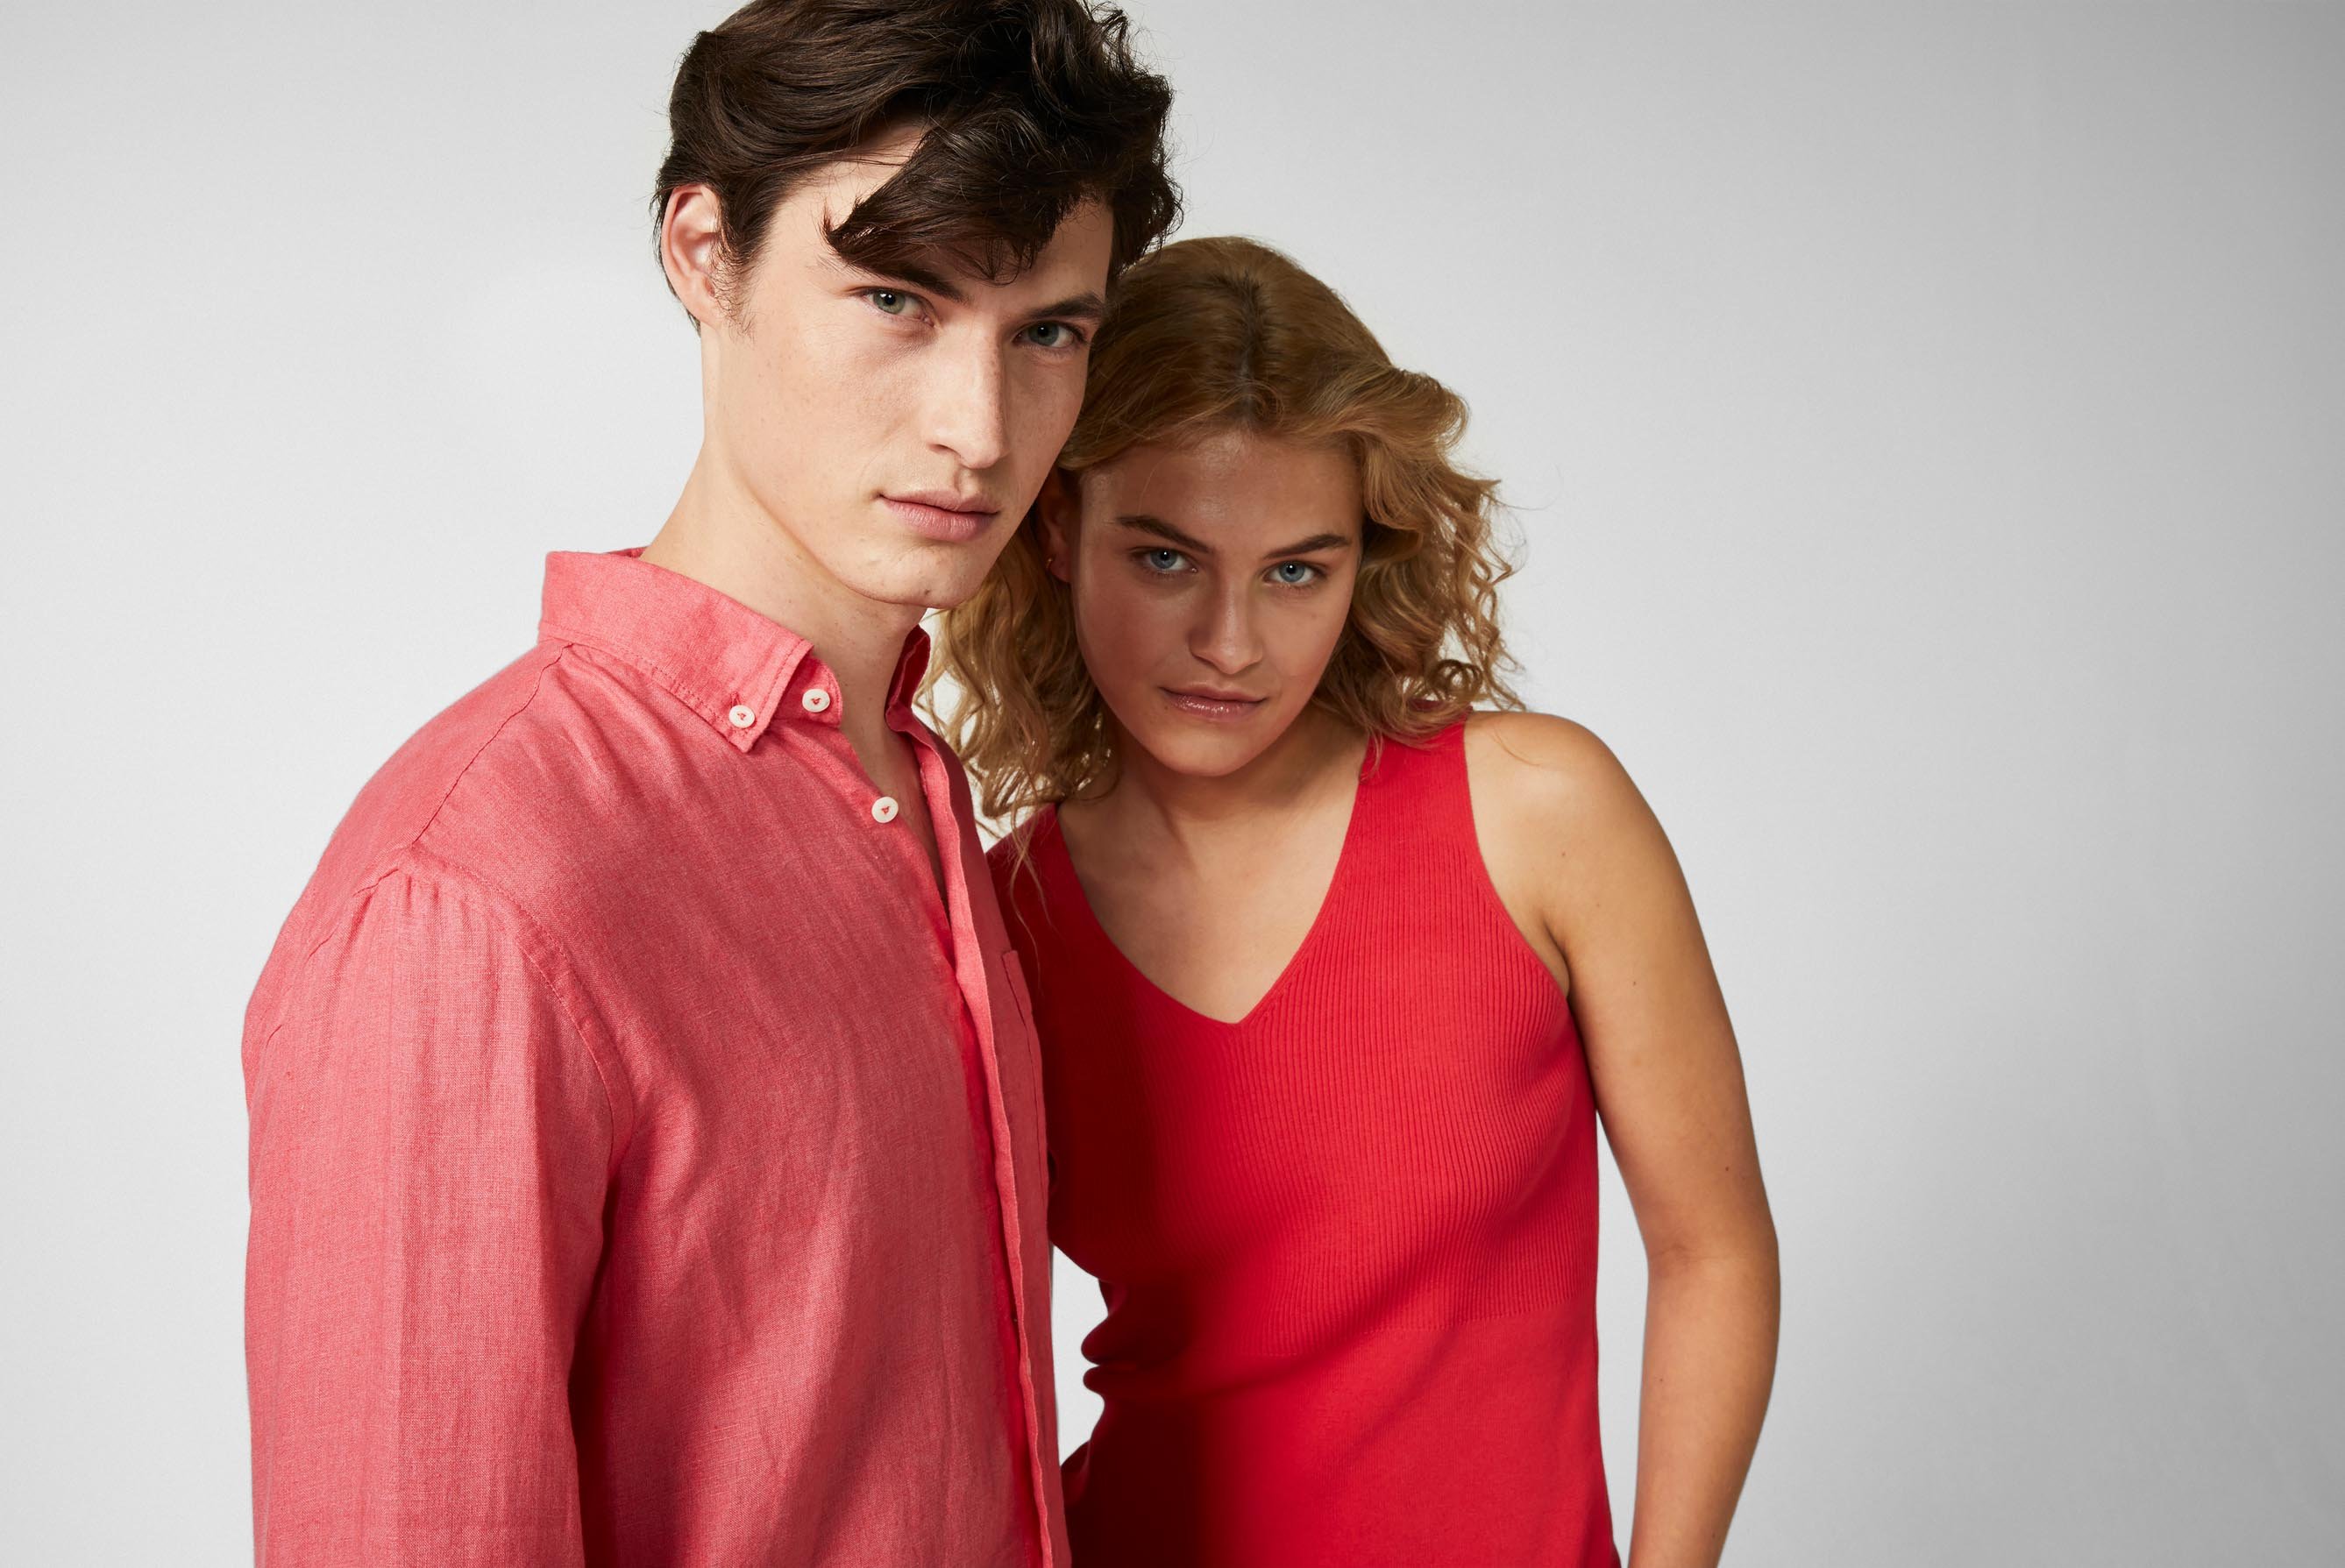 Tops & T-Shirts+Slim fit cotton tank top rot/rose+09.9966..S00192.540.S